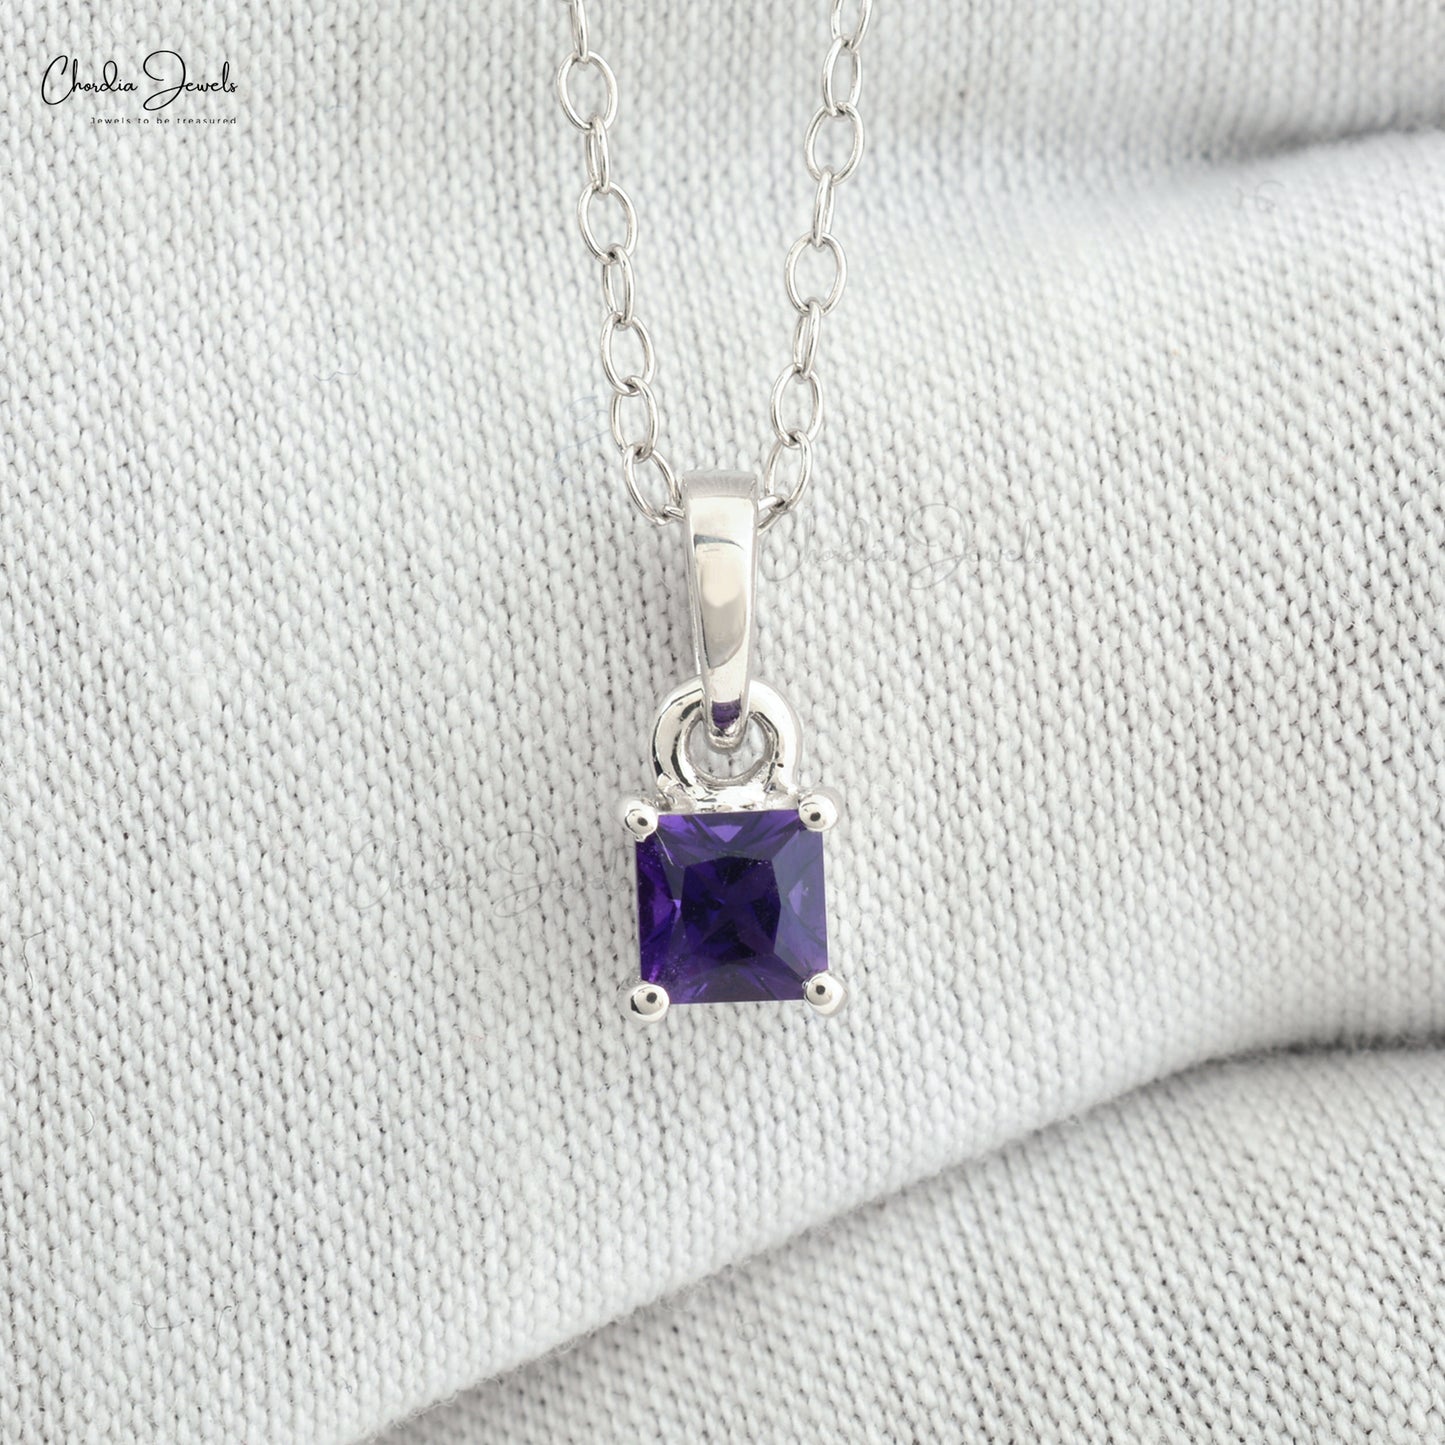 Natural 0.35ct Amethyst Gemstone Solitaire Pendant Solid 14k White Gold Prong Set Pendant